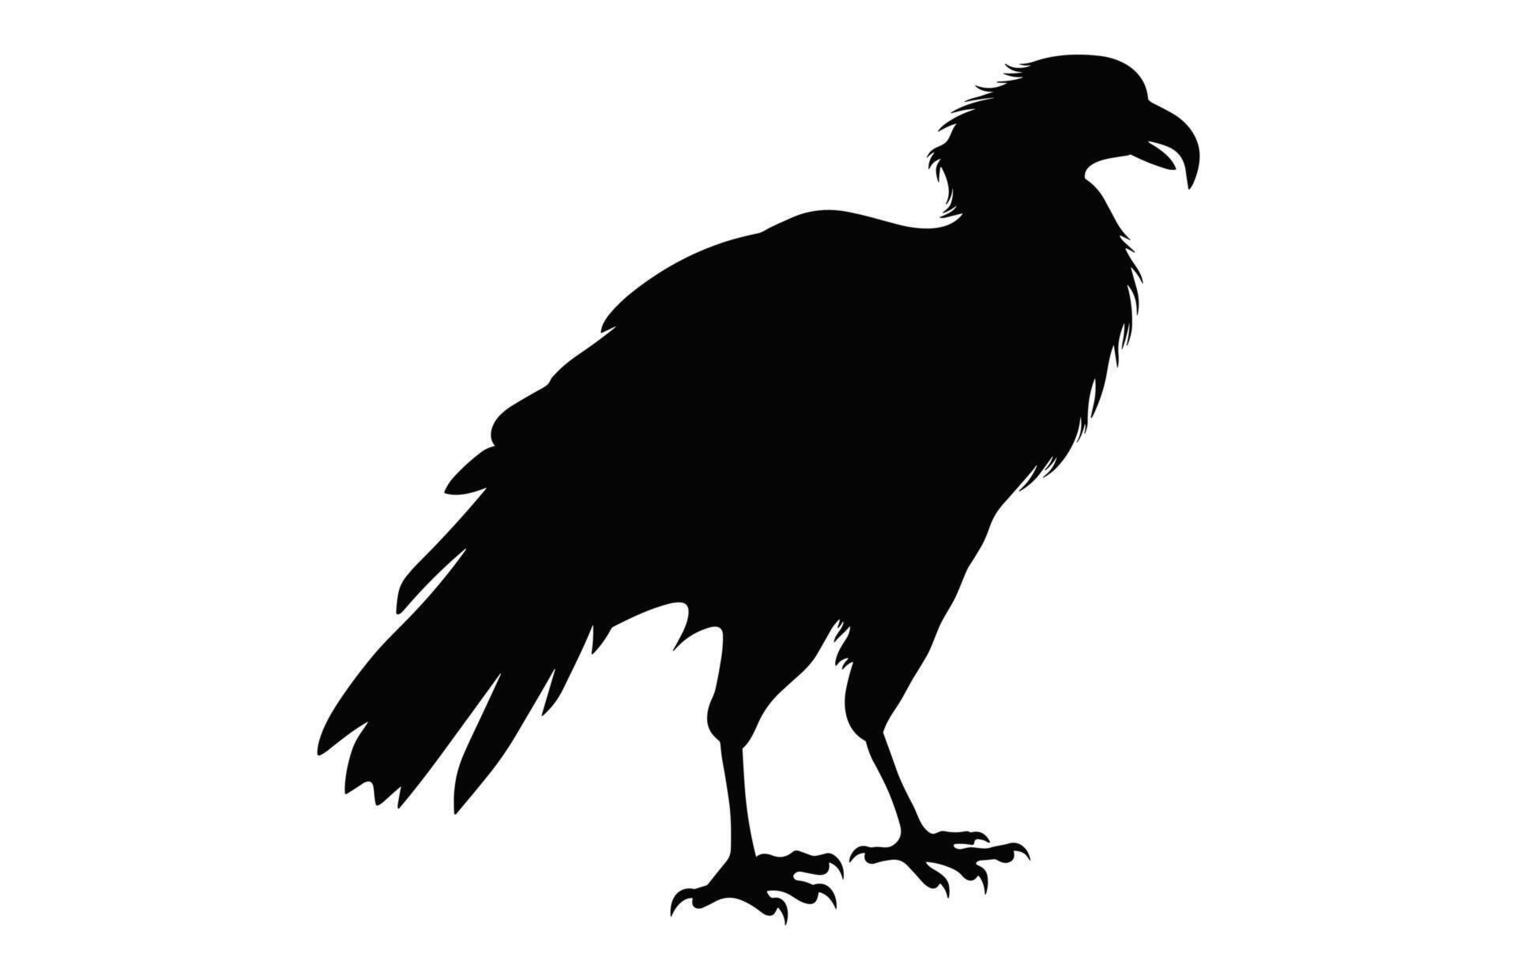 Big Griffon Vulture silhouette isolated on a white background, A Flying Griffon Vulture Beak black vector